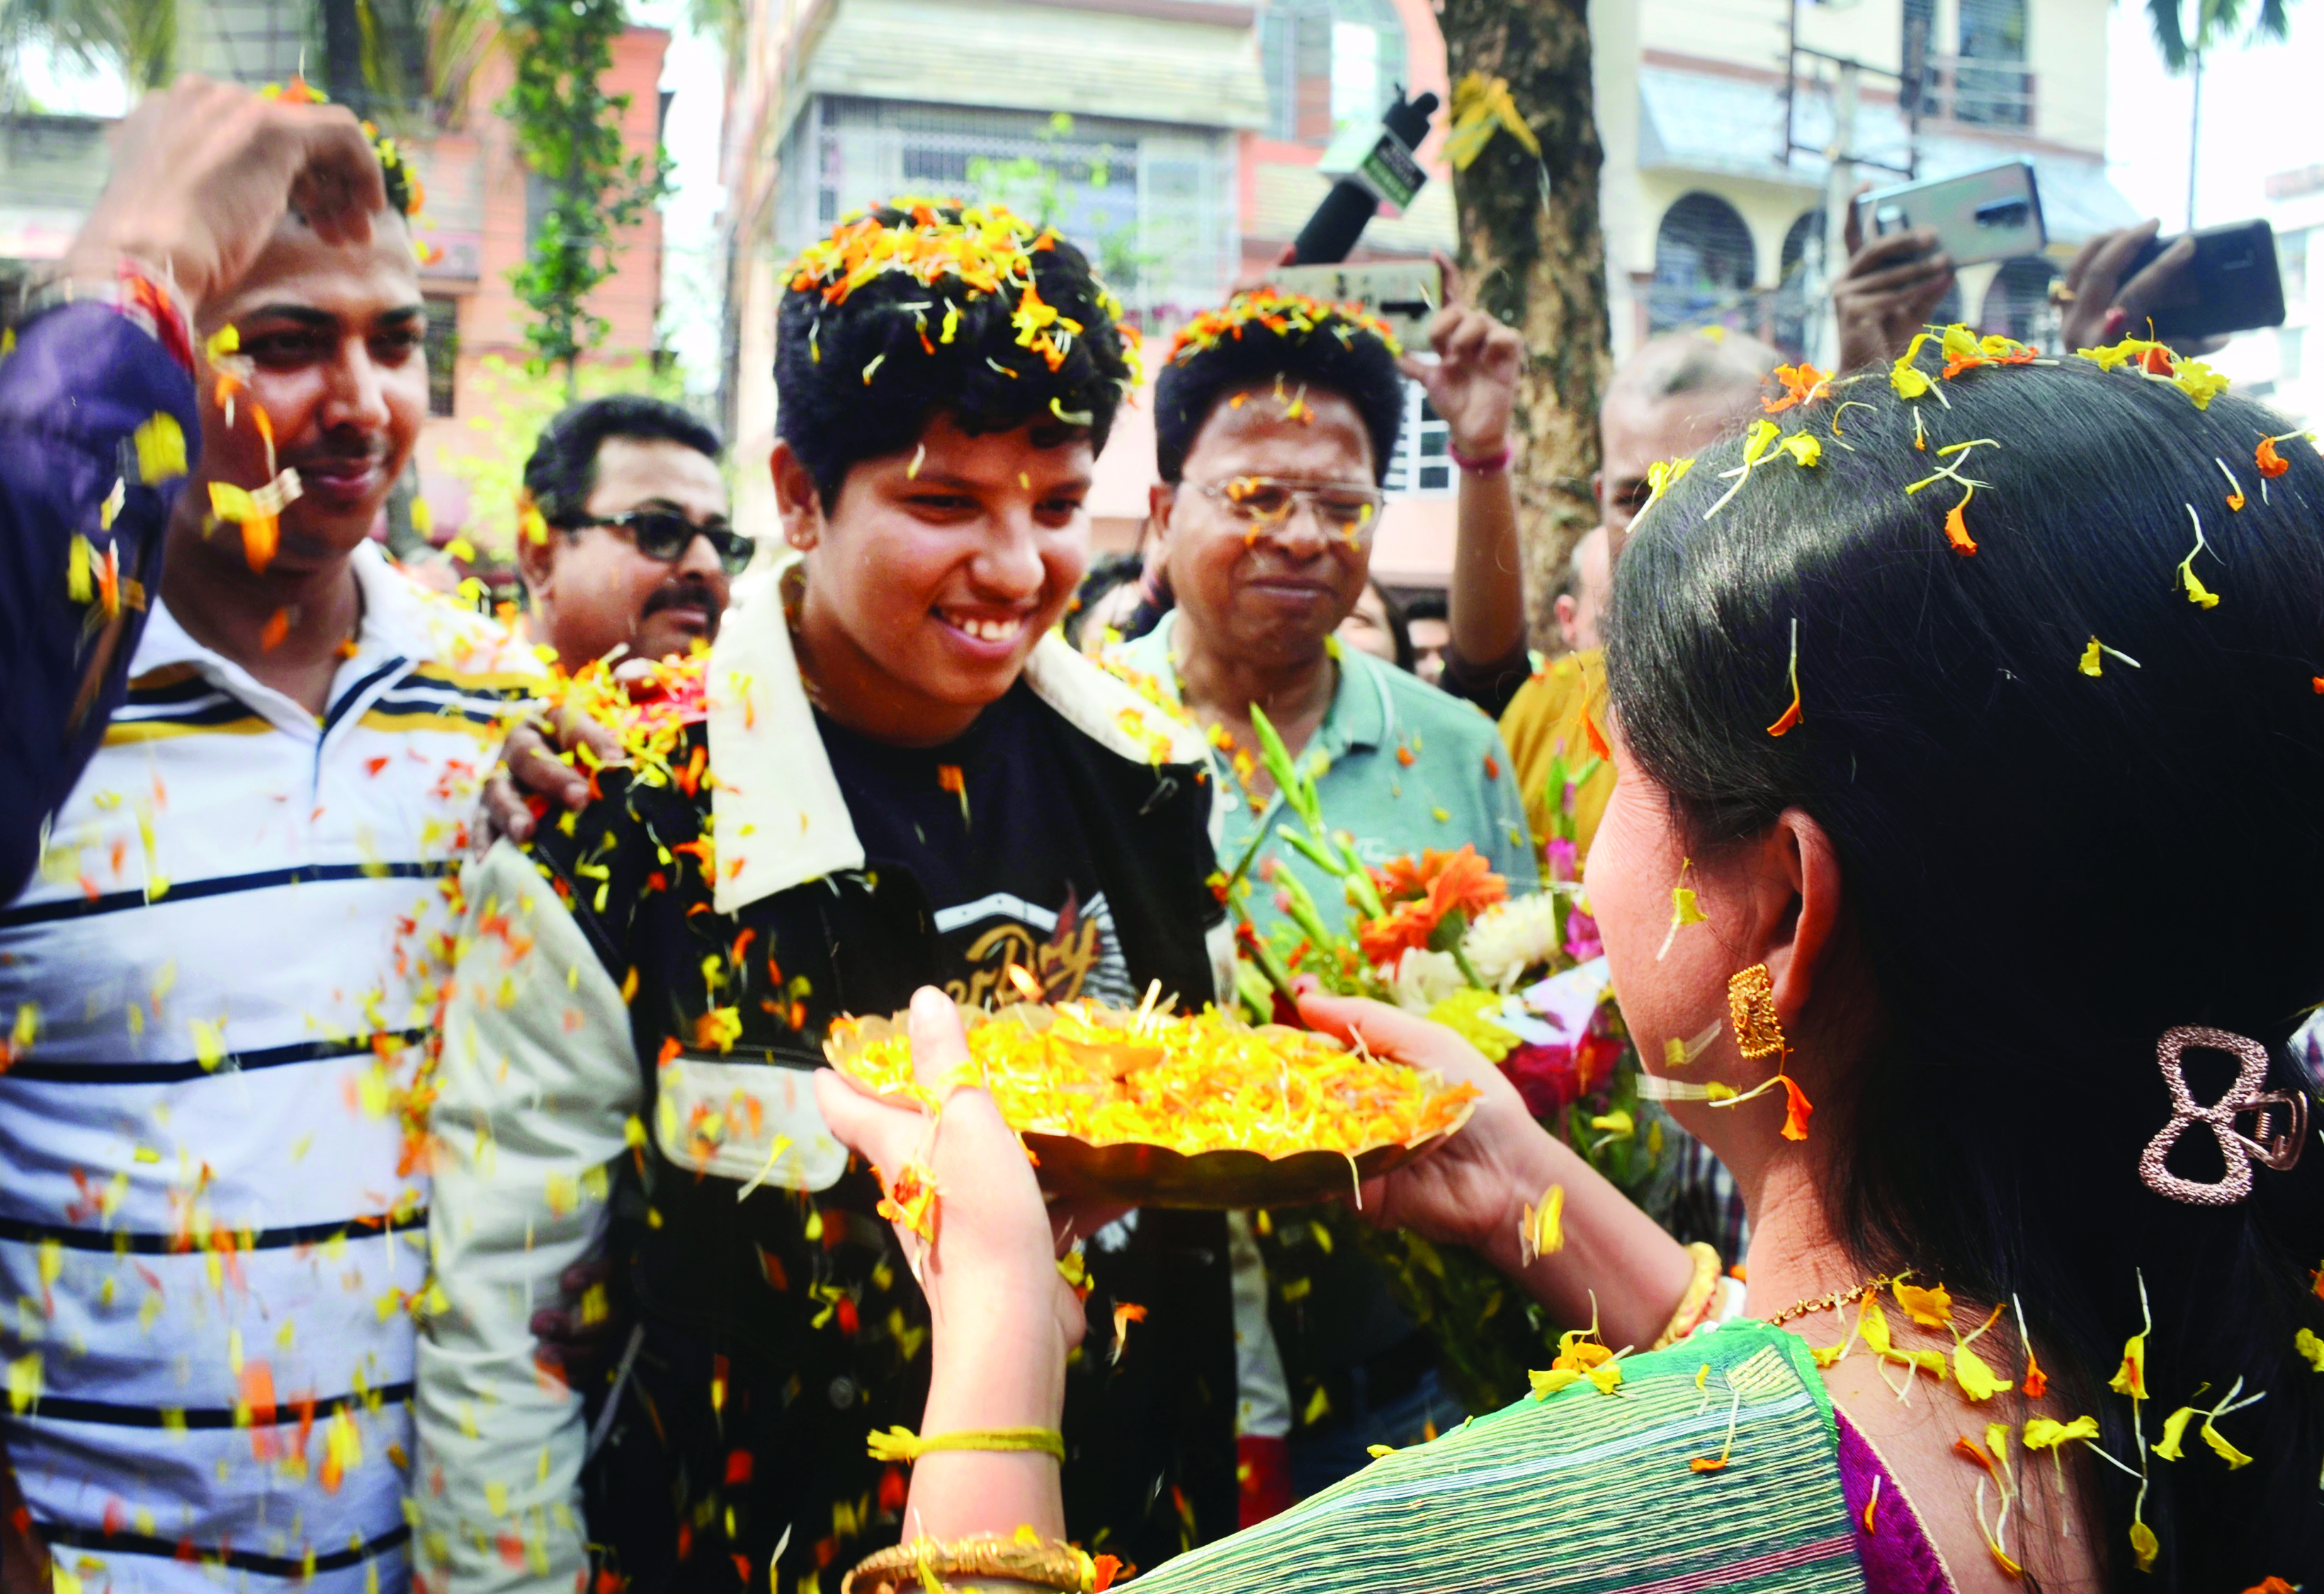 Return of the native: Cricketer Richa Ghosh receives warm welcome in Siliguri